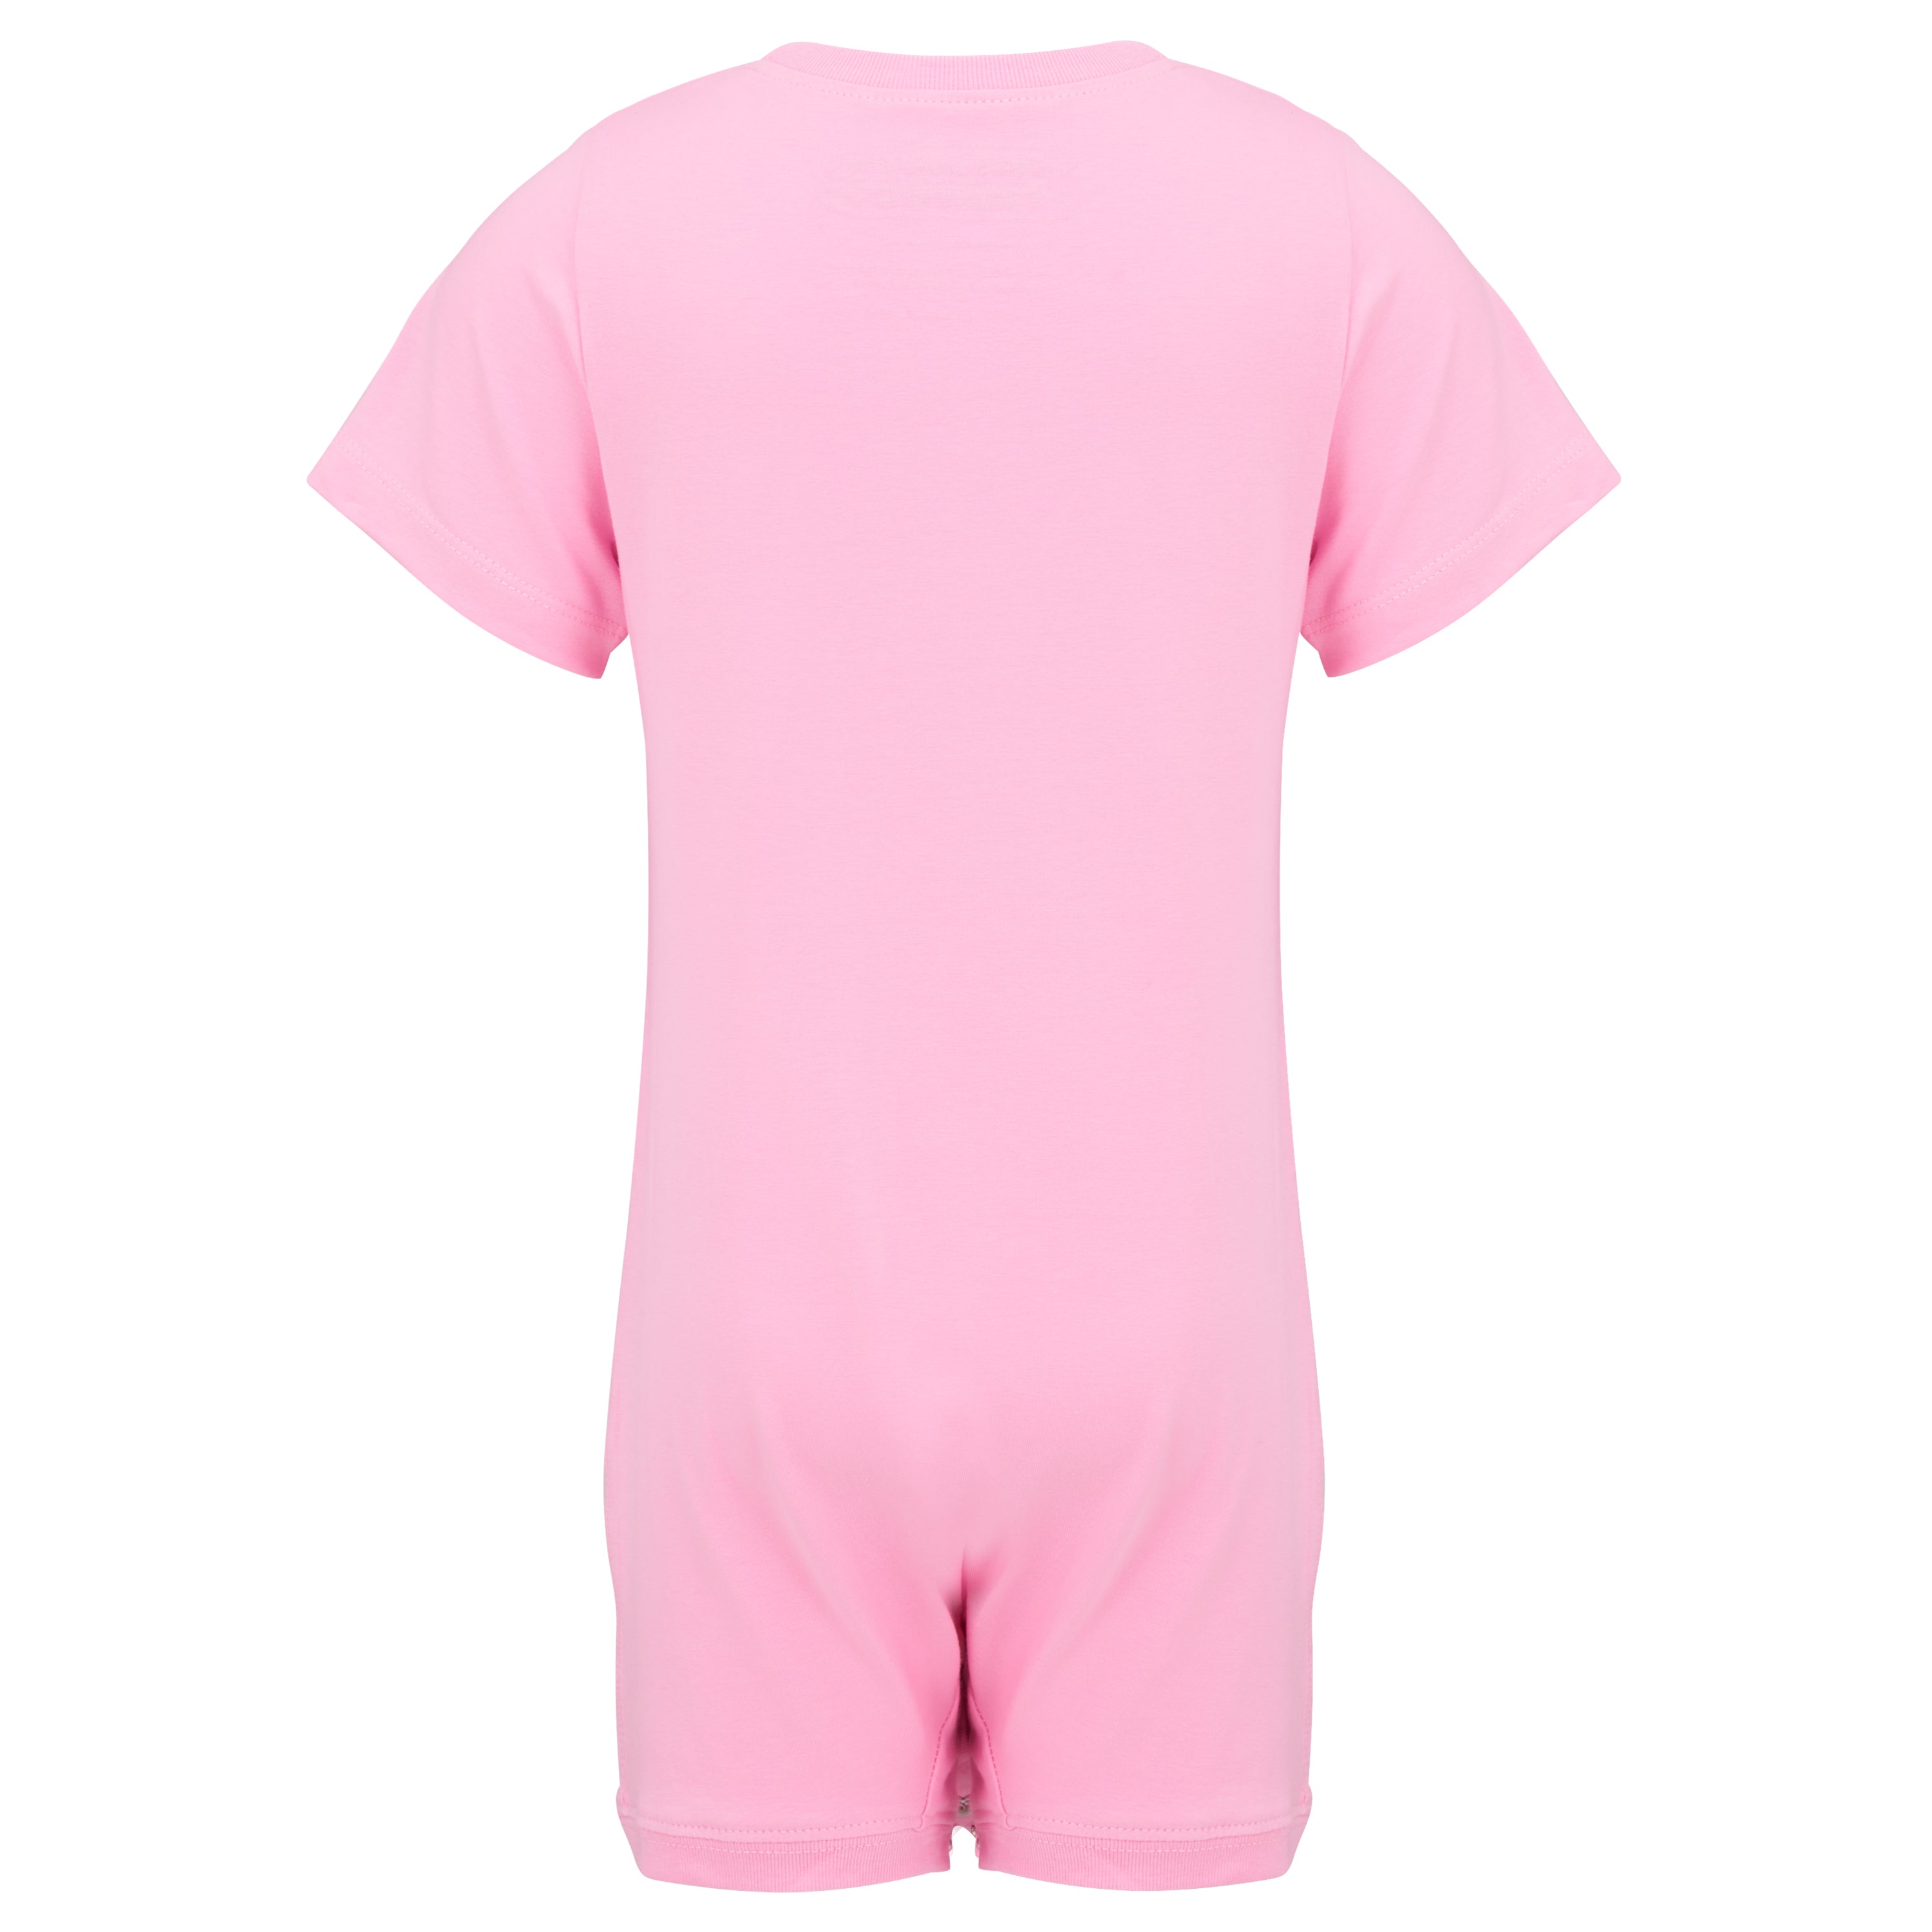 KayCey_Adaptive_clothing_for_older_children_with_special_needs_Short_Sleeve_Pink_Back